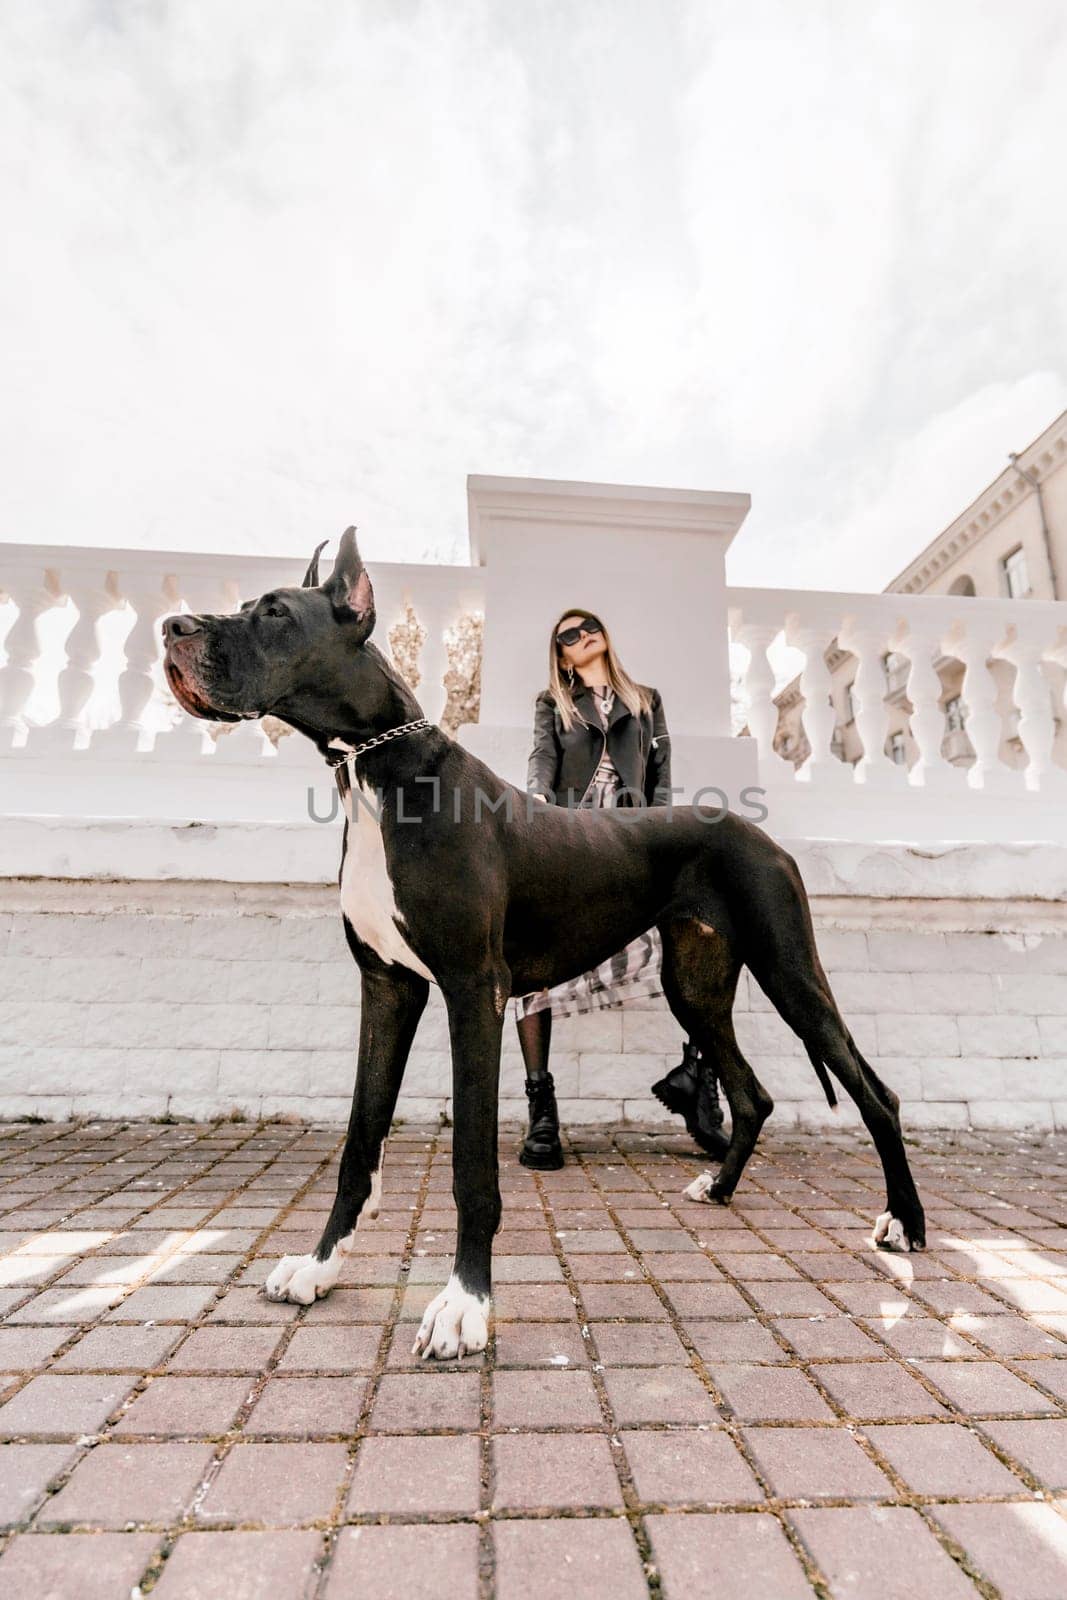 A woman walks with her Great Dane in an urban setting, enjoying the outdoors and the company of her dog